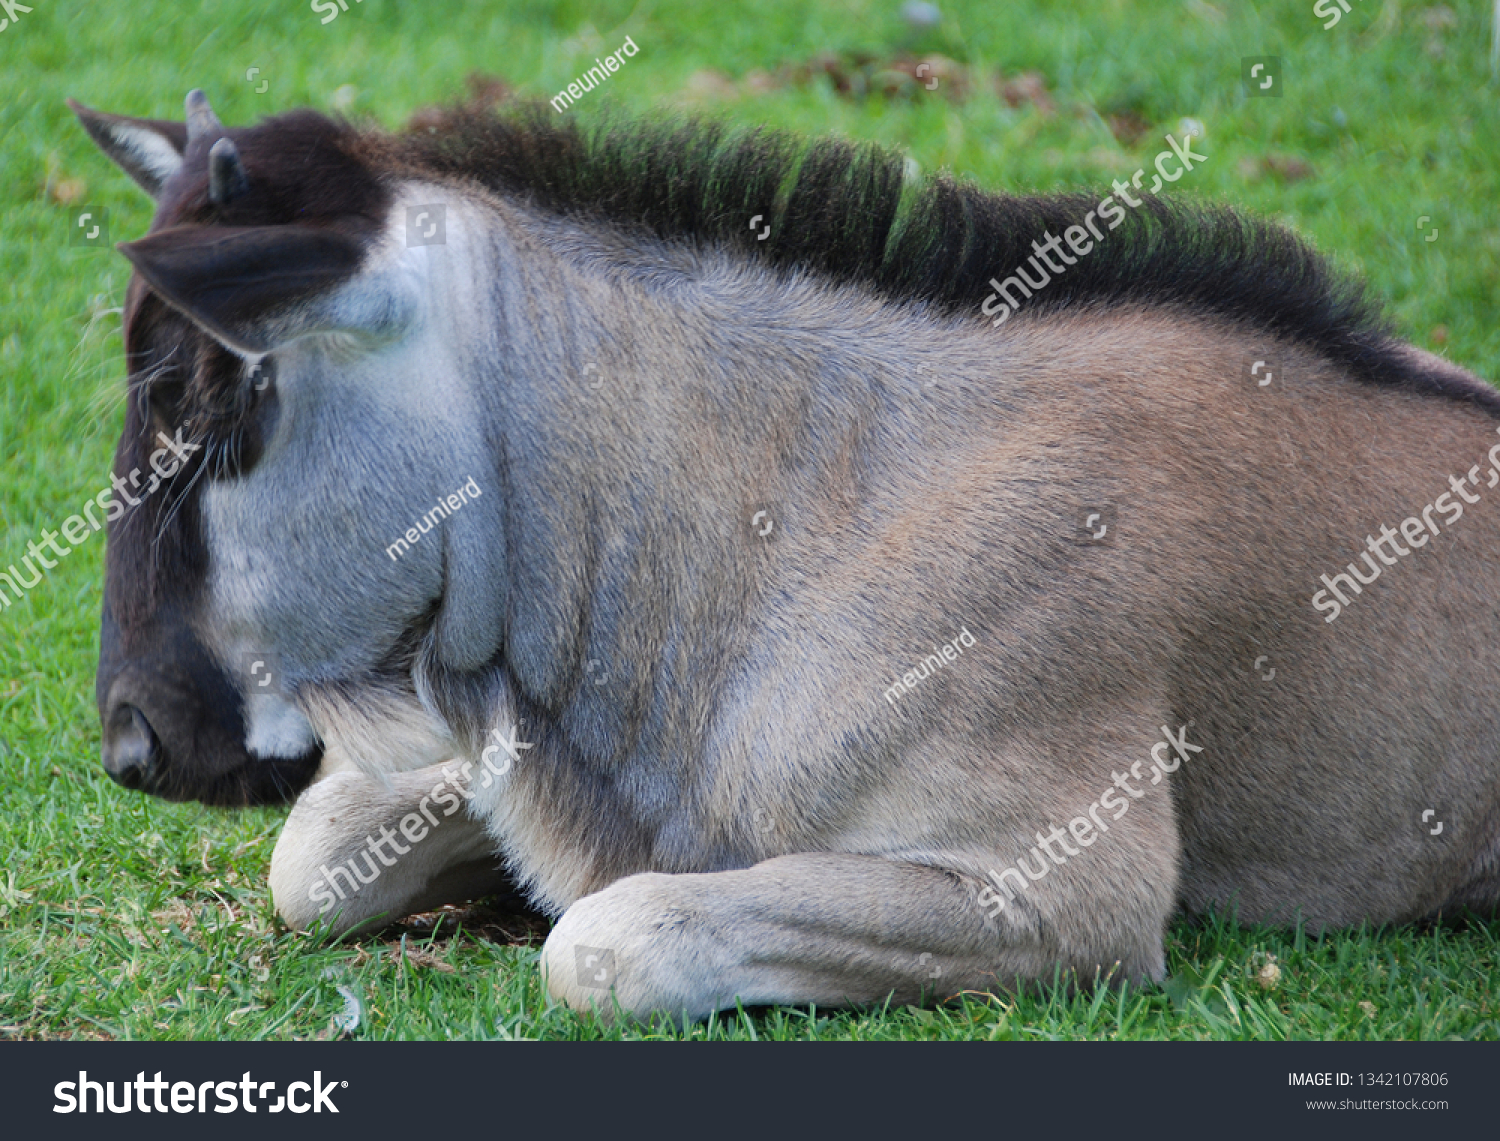 The wildebeest or wildebai, also called the gnu is an antelope of the genus Connochaetes. It is a hooved (ungulate) mammal. #1342107806